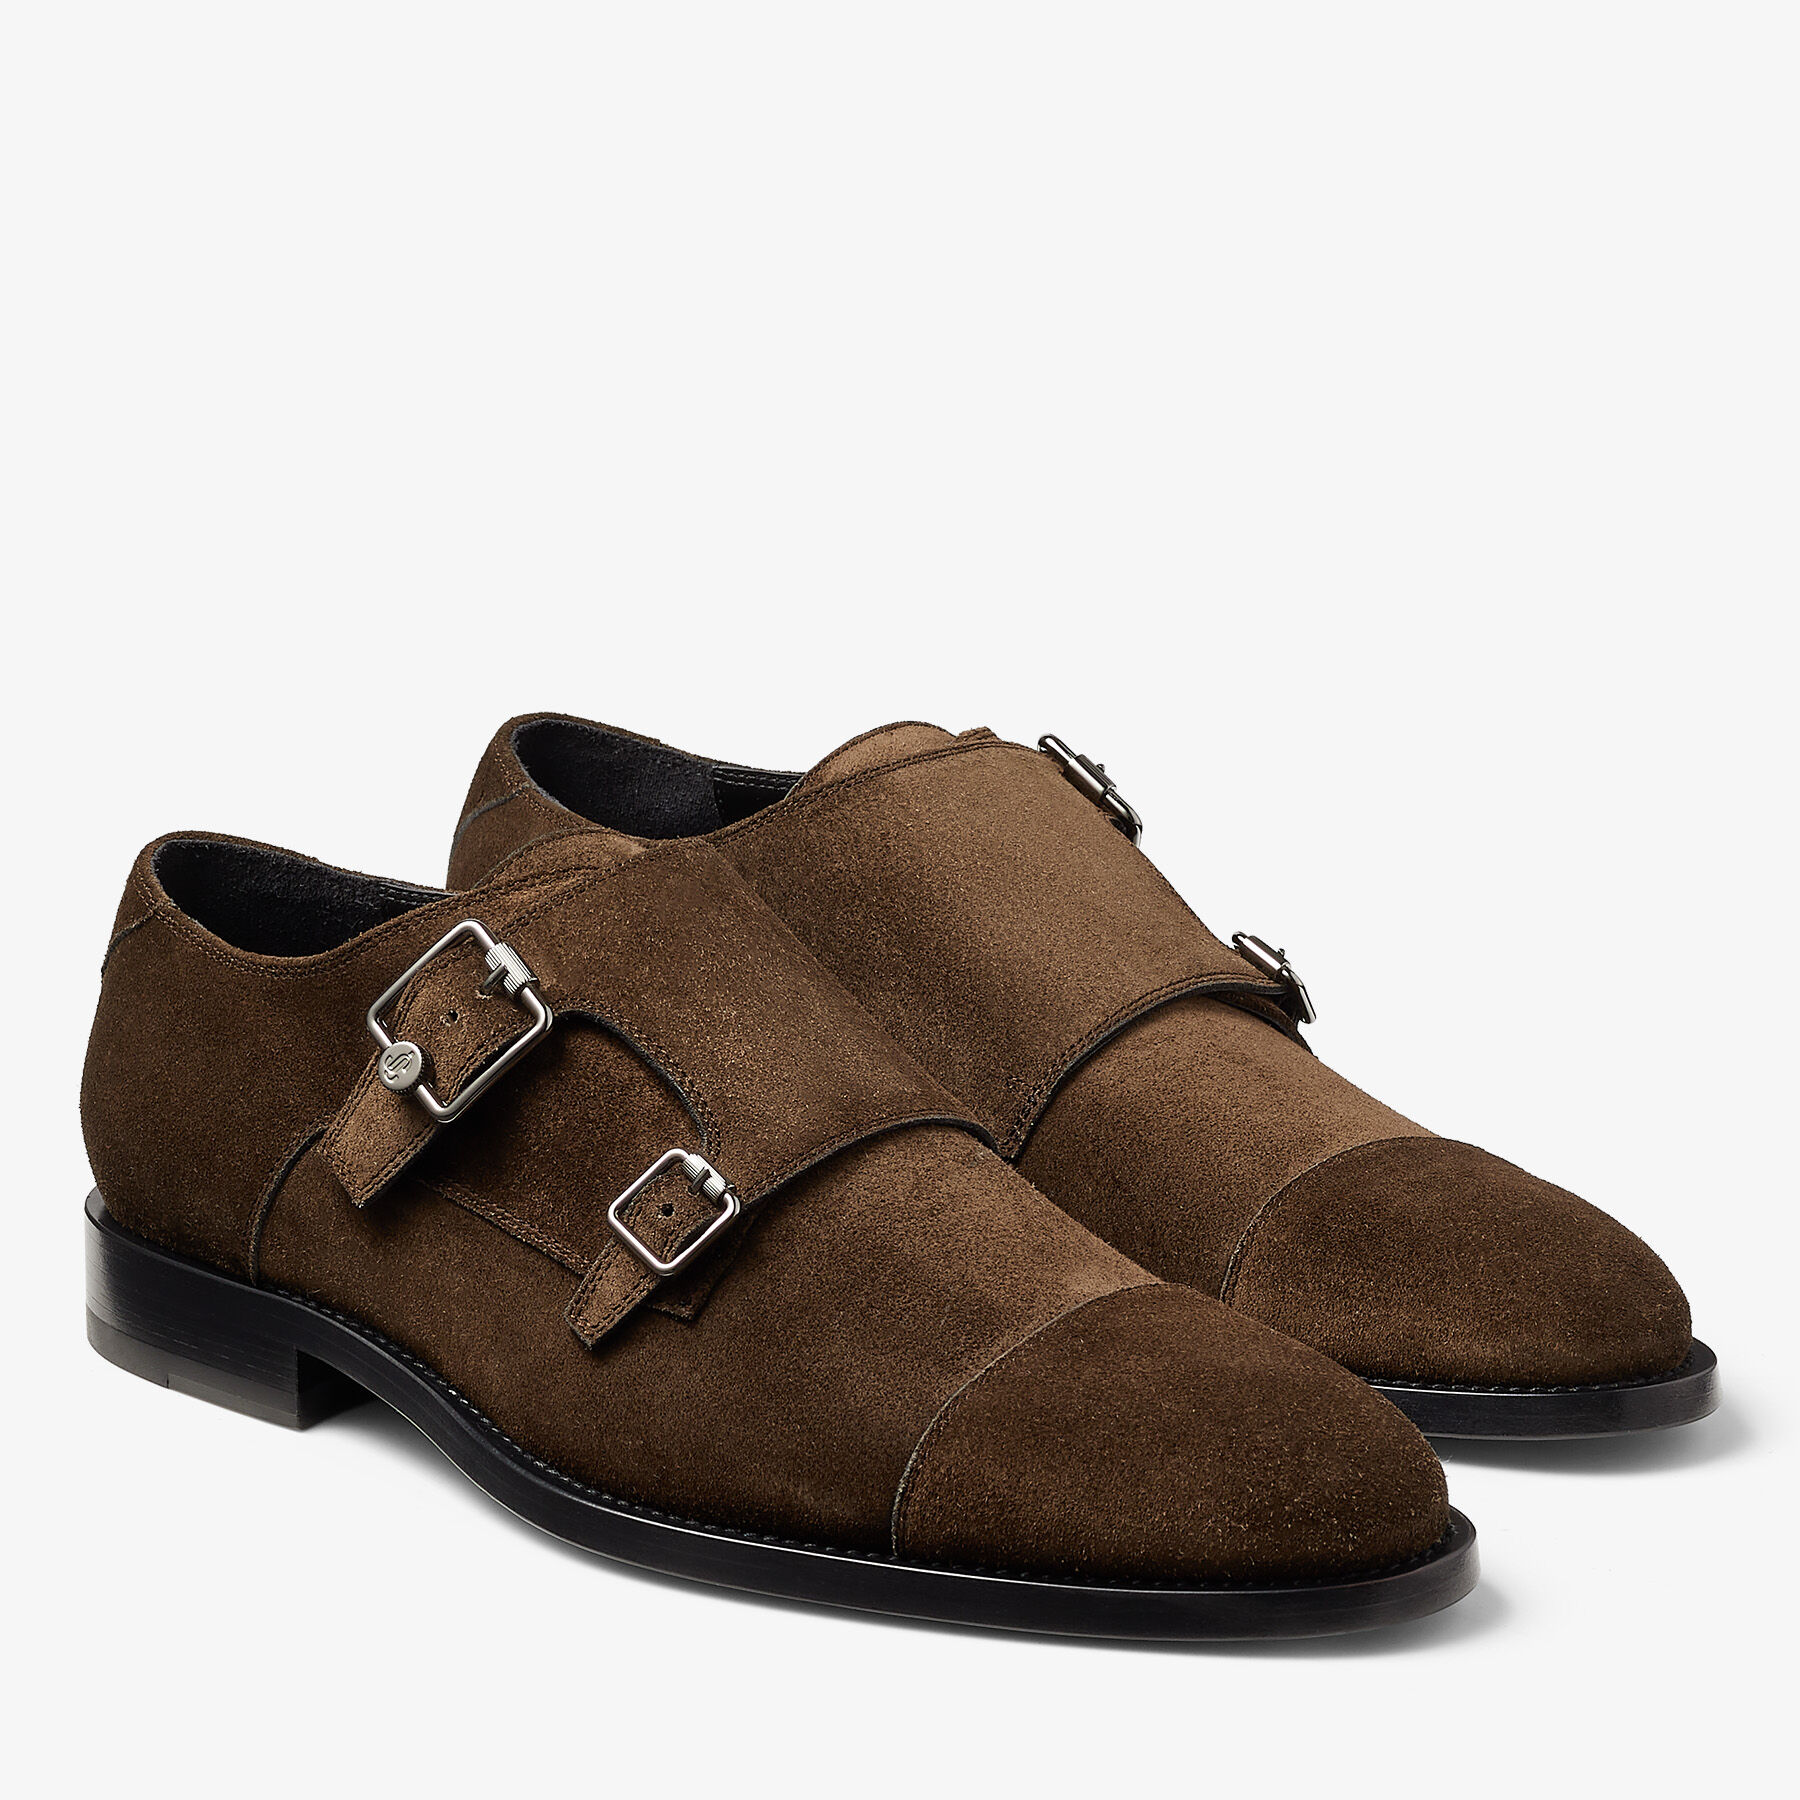 Umber Velvet Suede Monk Strap Shoes | FINNION MONKSTRAP | Summer 2022  collection | JIMMY CHOO